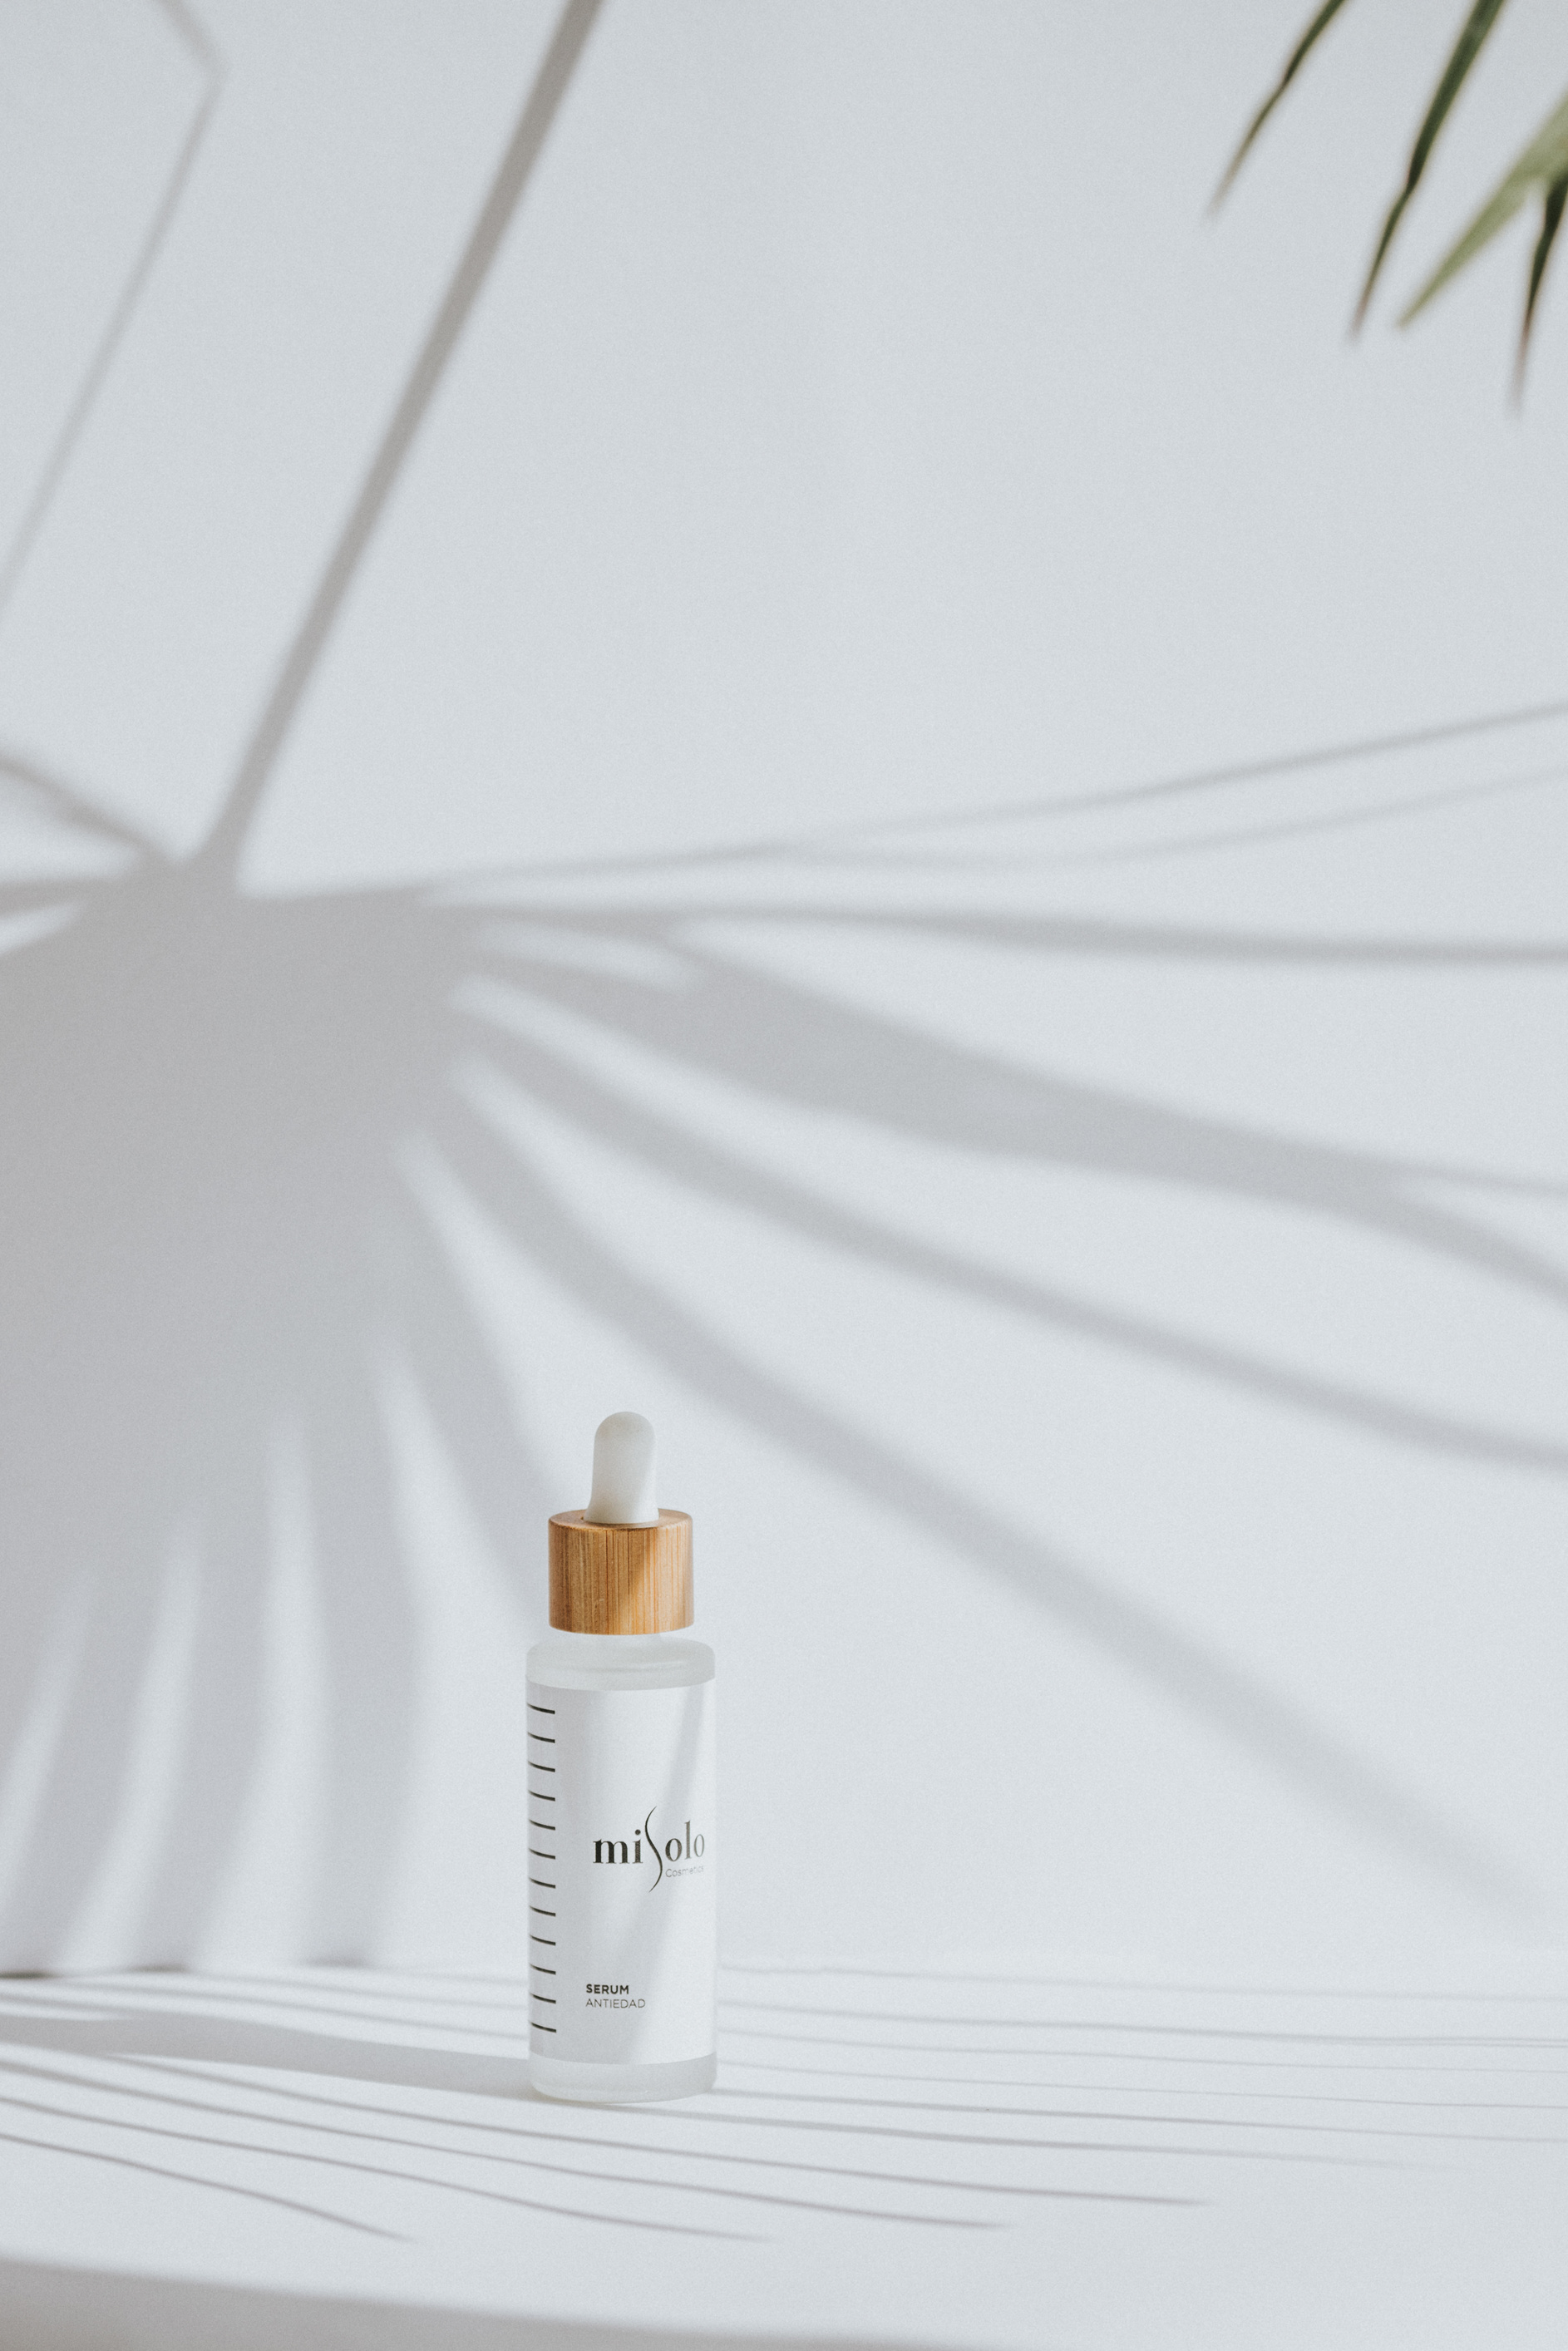 A Cosmetic Product on a White Surface